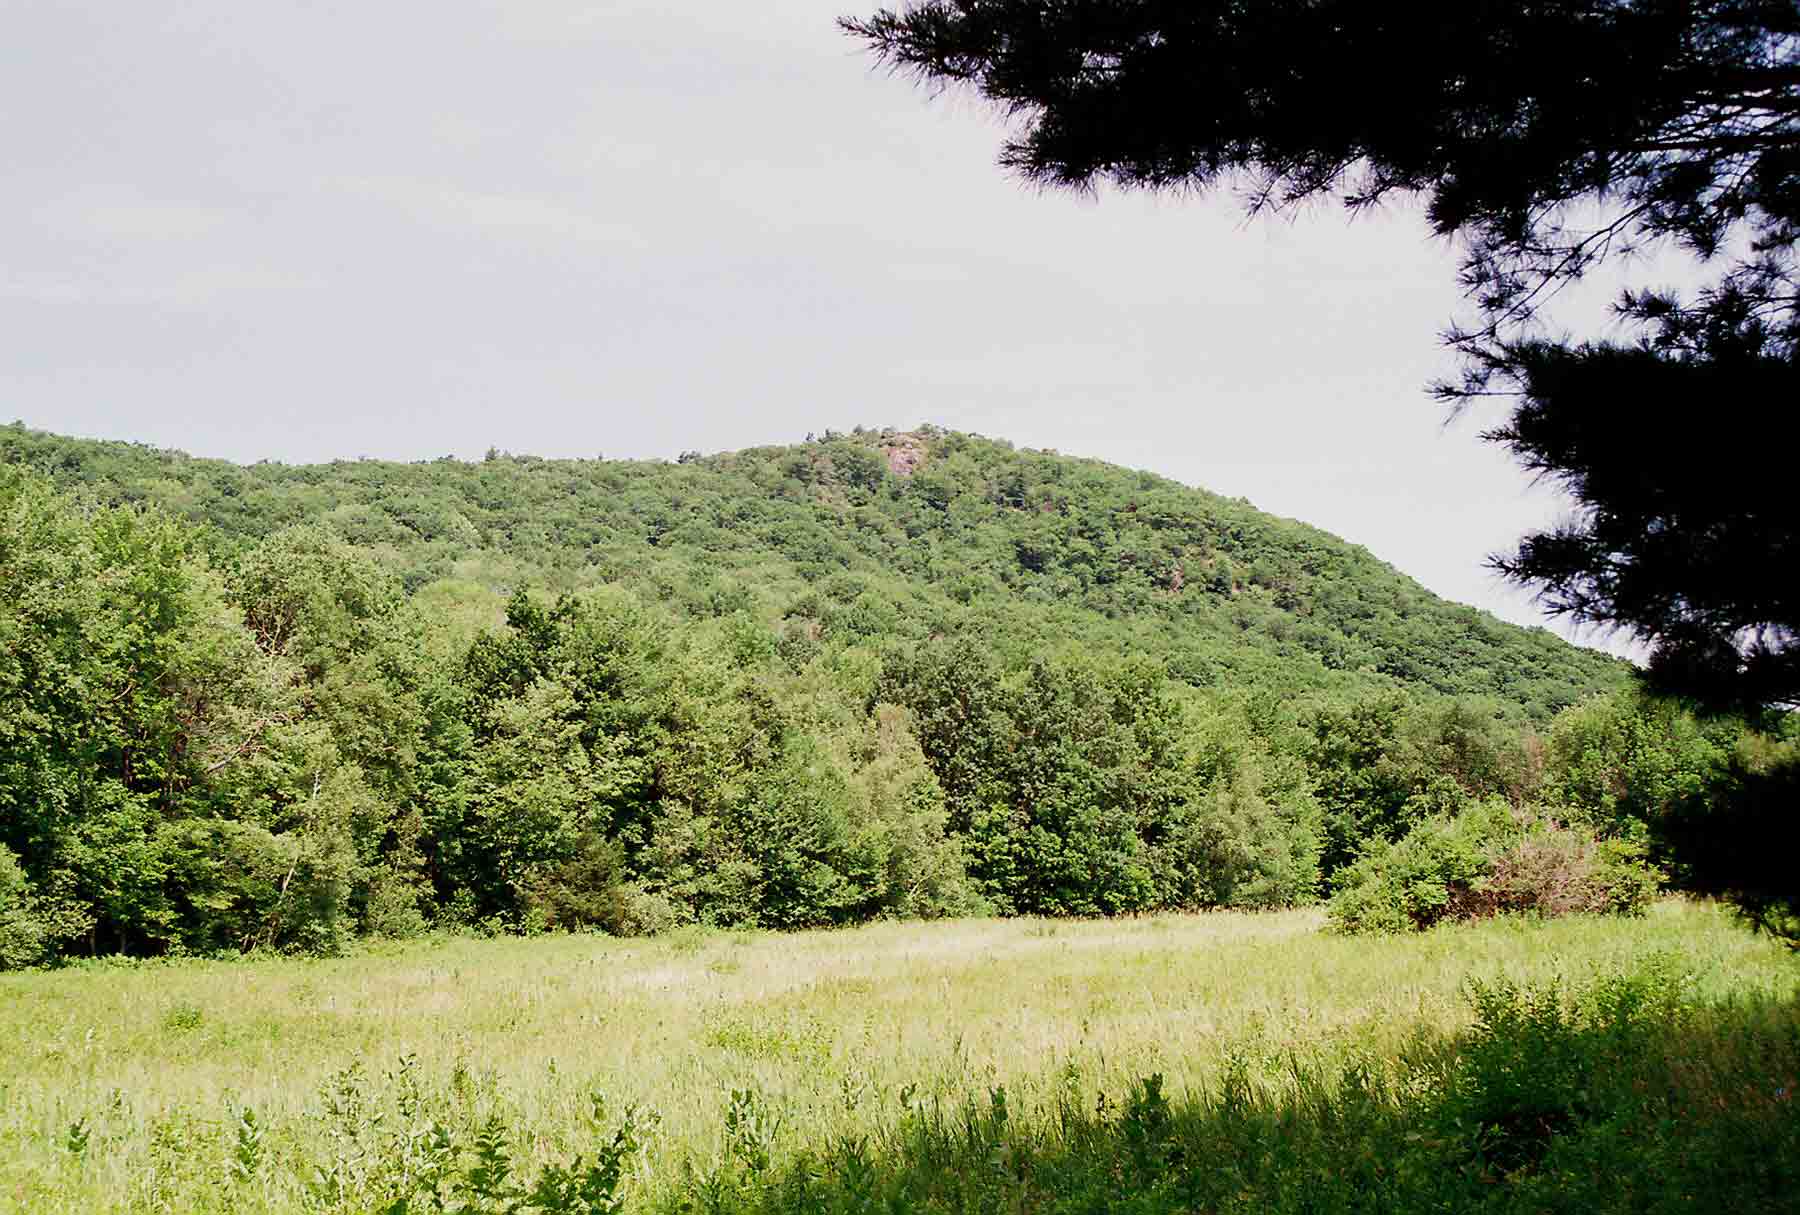 View back towards Lions head from near the trail head of the blue-blazed Lions Head Trail (former AT route). The previous two pictures were taken from the ledge visible near the top. The Lion's Head Trail meets the AT at MM 4.9.  Courtesy dlcul@conncoll.edu